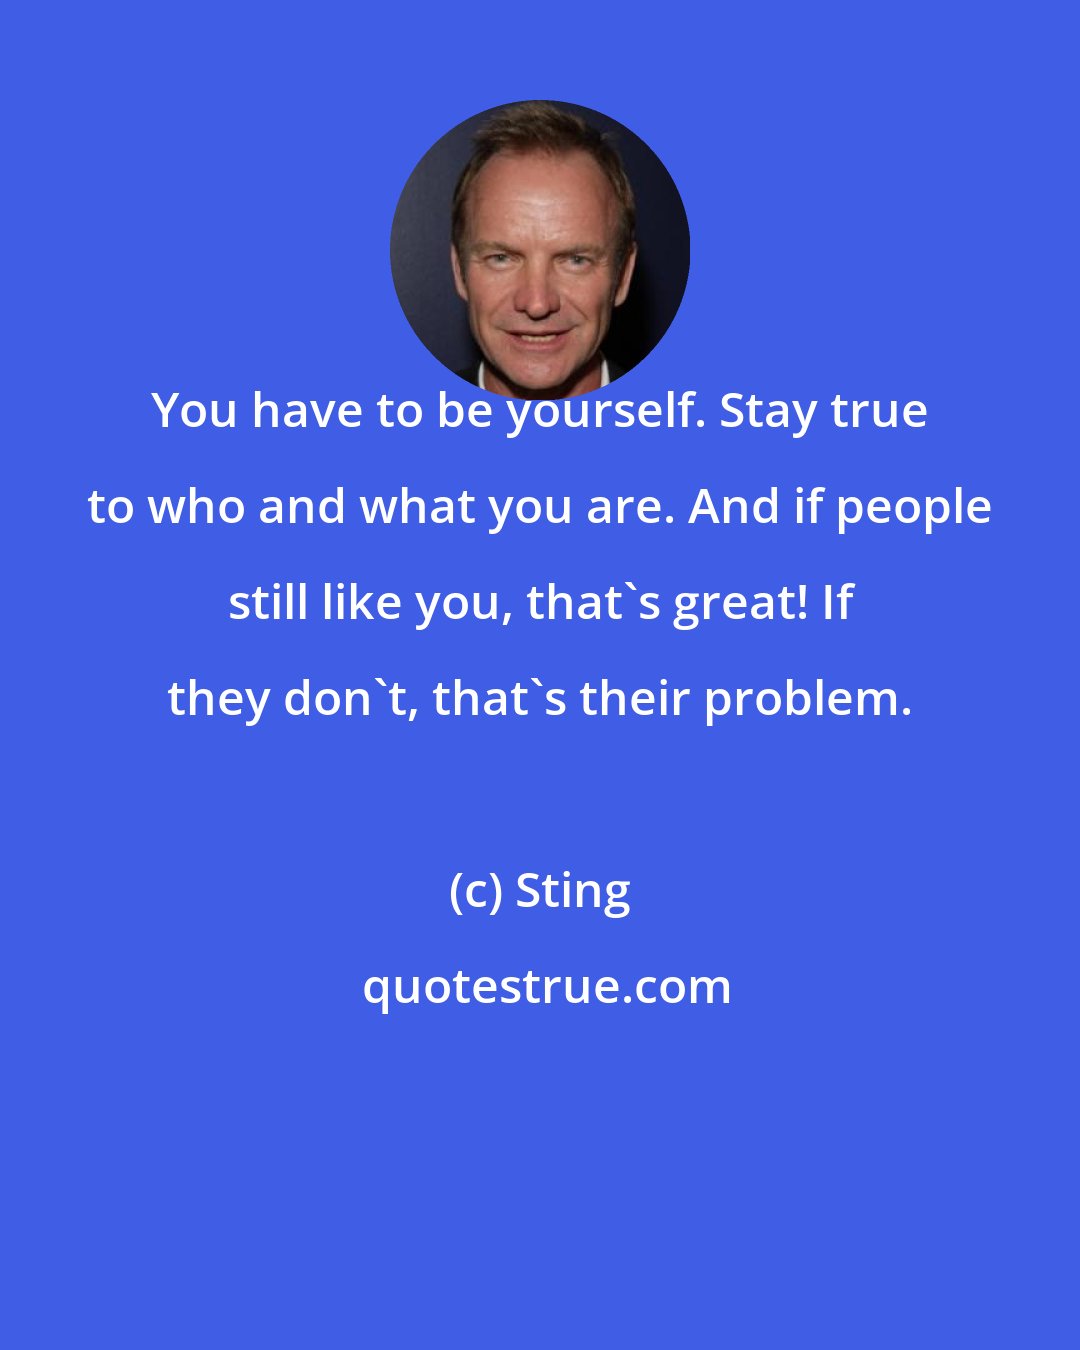 Sting: You have to be yourself. Stay true to who and what you are. And if people still like you, that's great! If they don't, that's their problem.